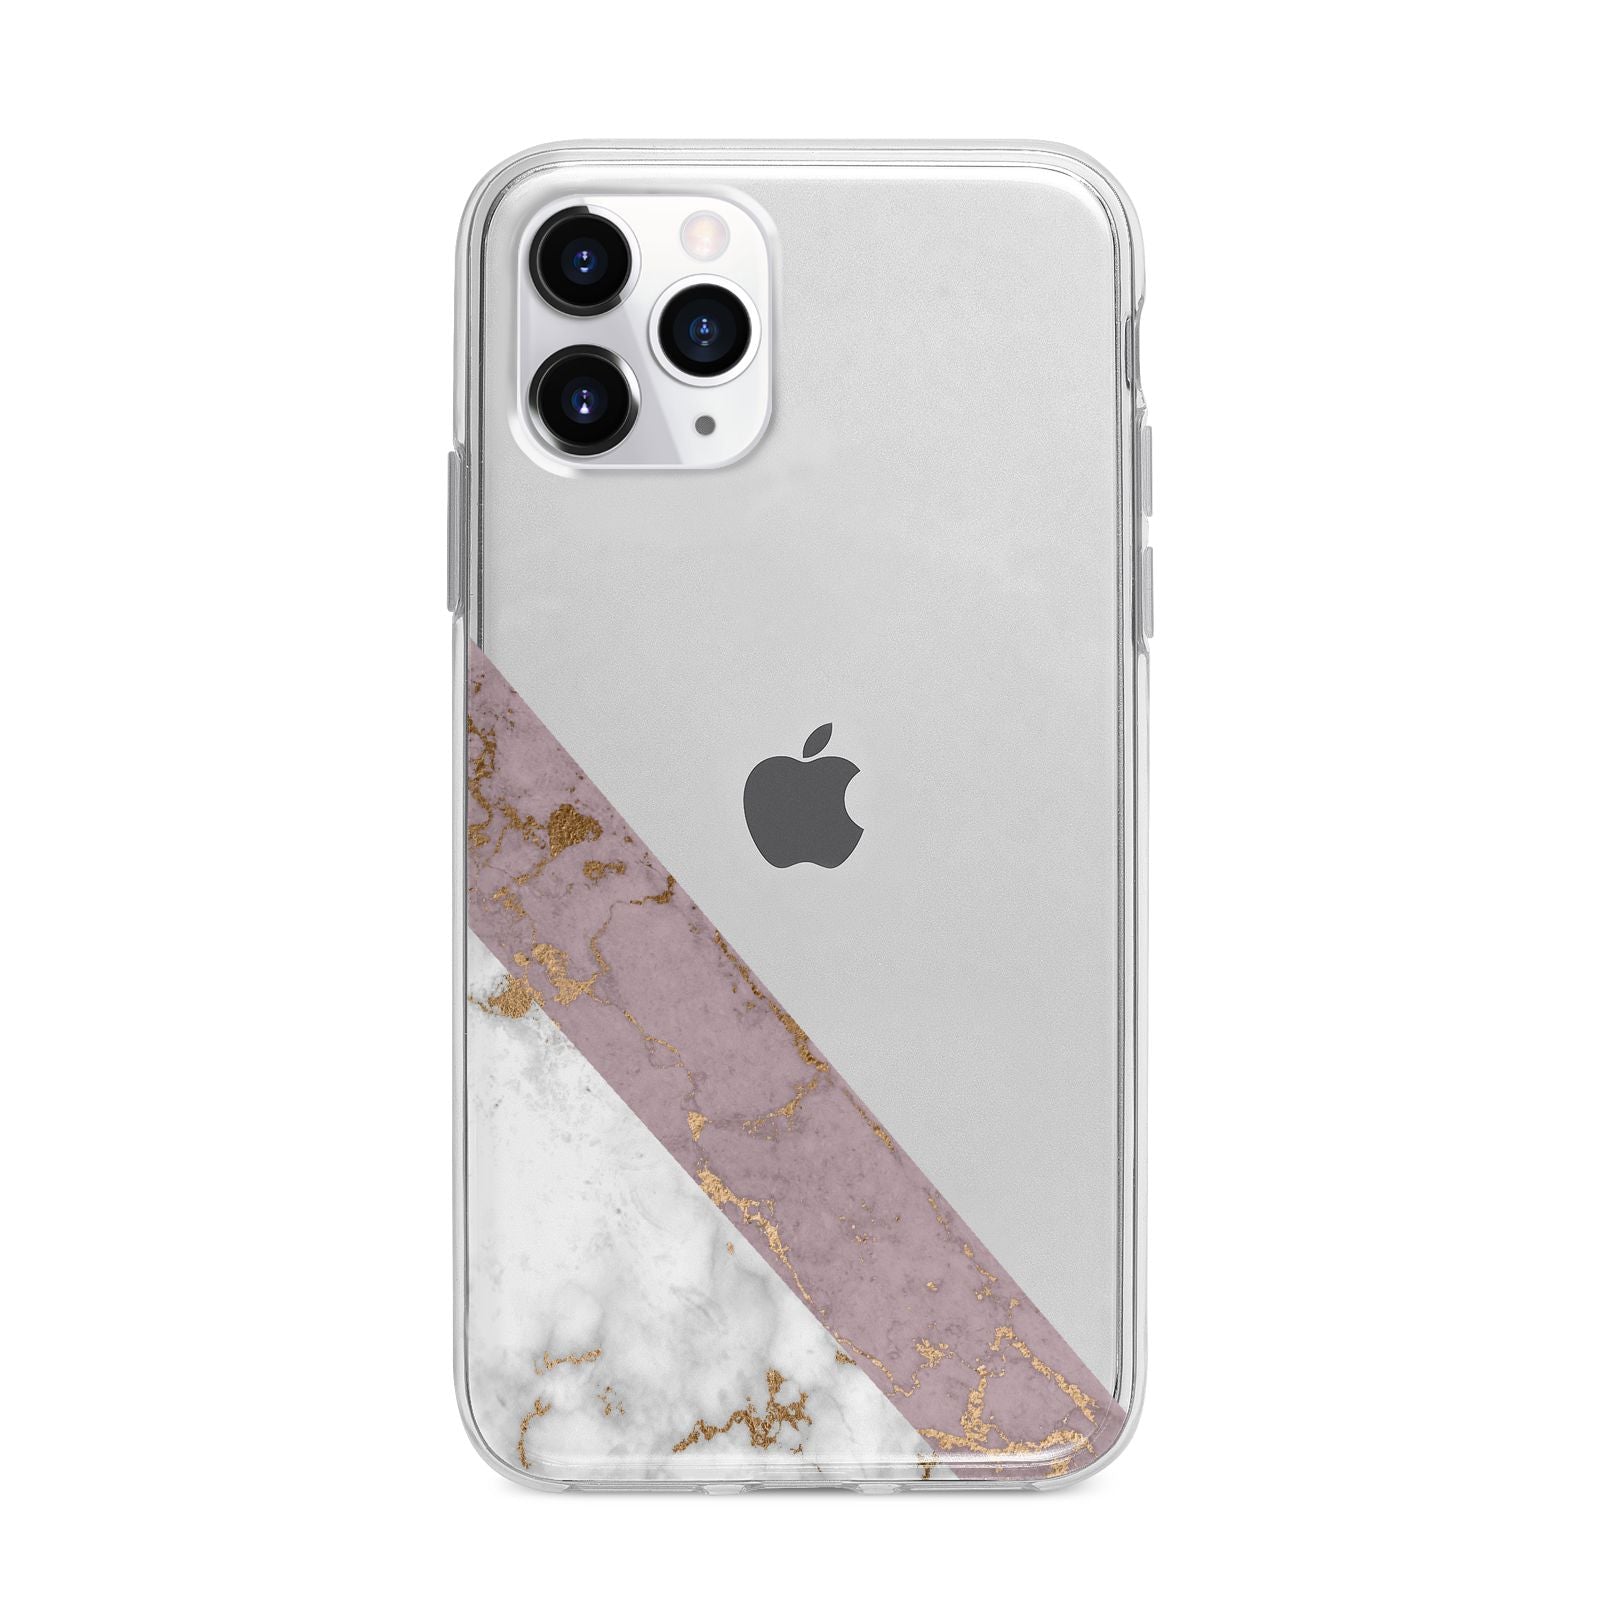 Transparent Pink and White Marble Apple iPhone 11 Pro Max in Silver with Bumper Case